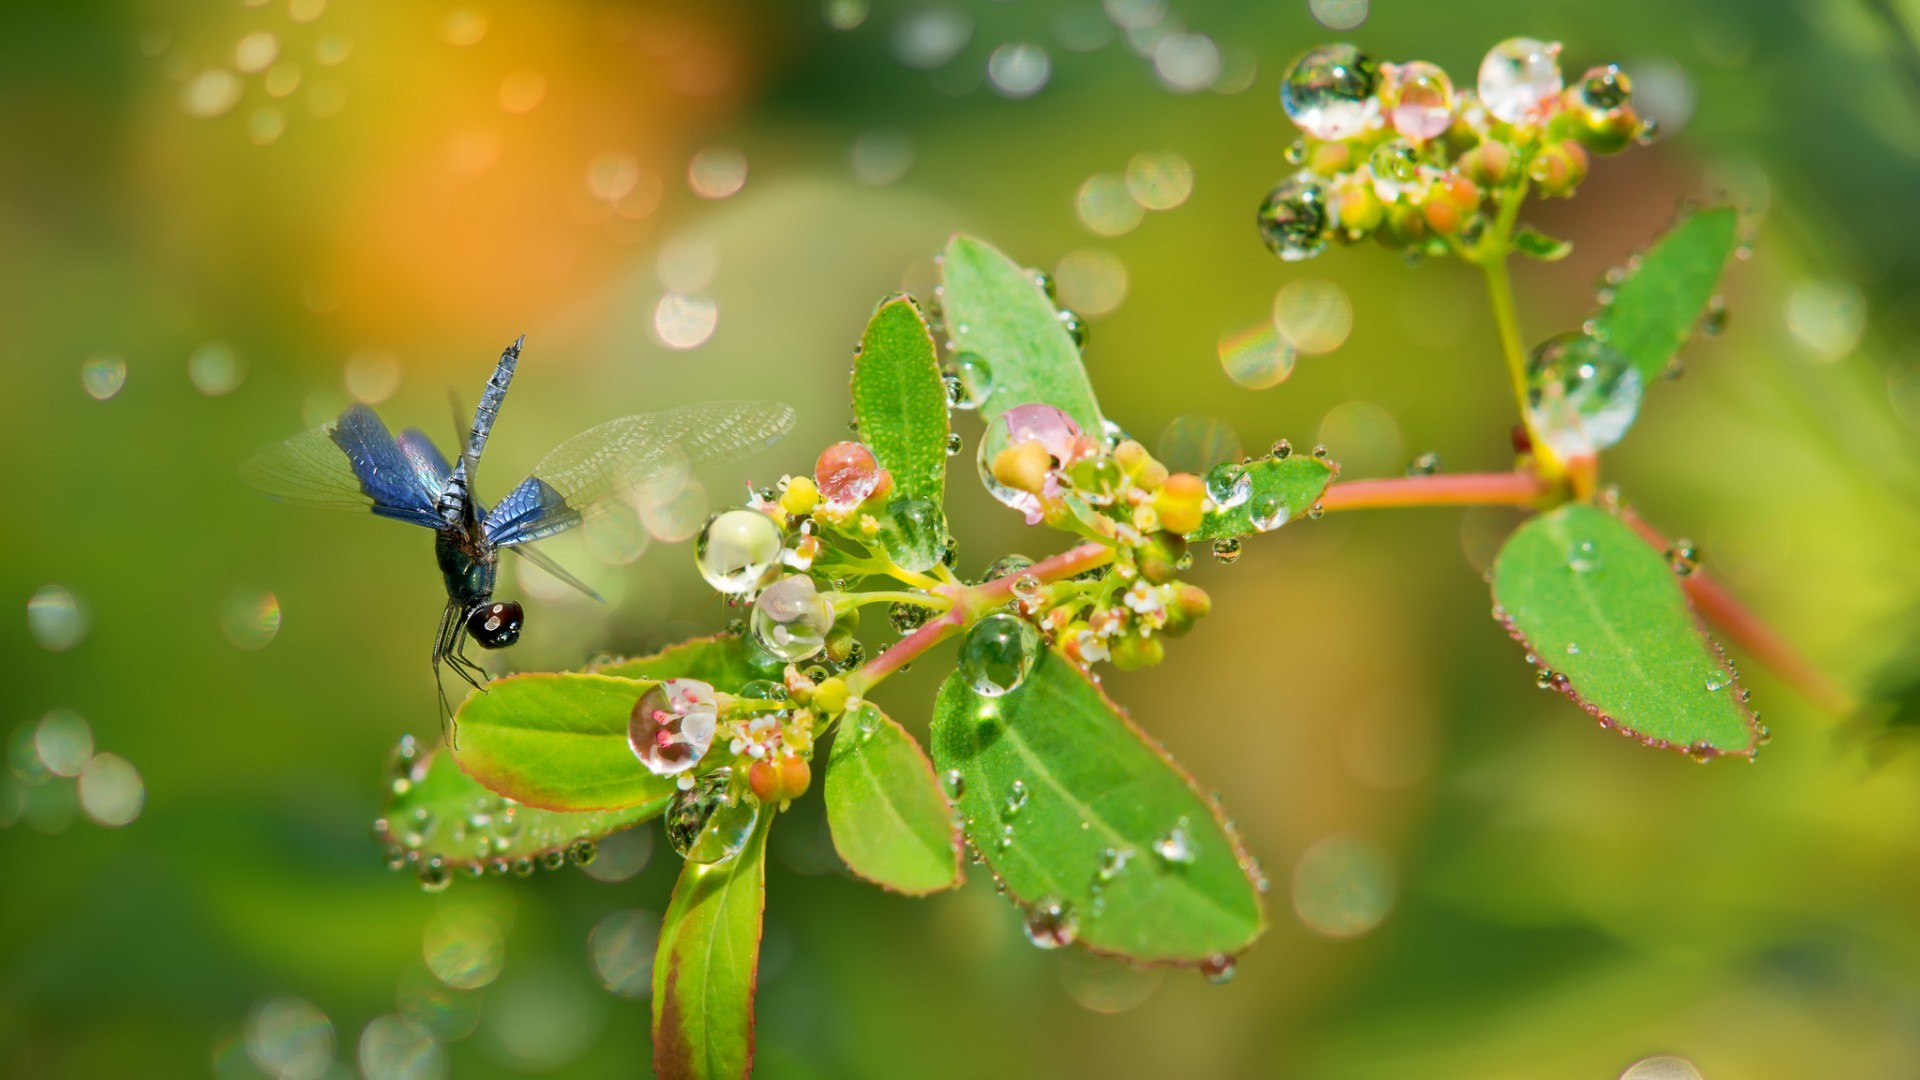 General 1920x1080 insect plants water drops leaves green vibrant animals